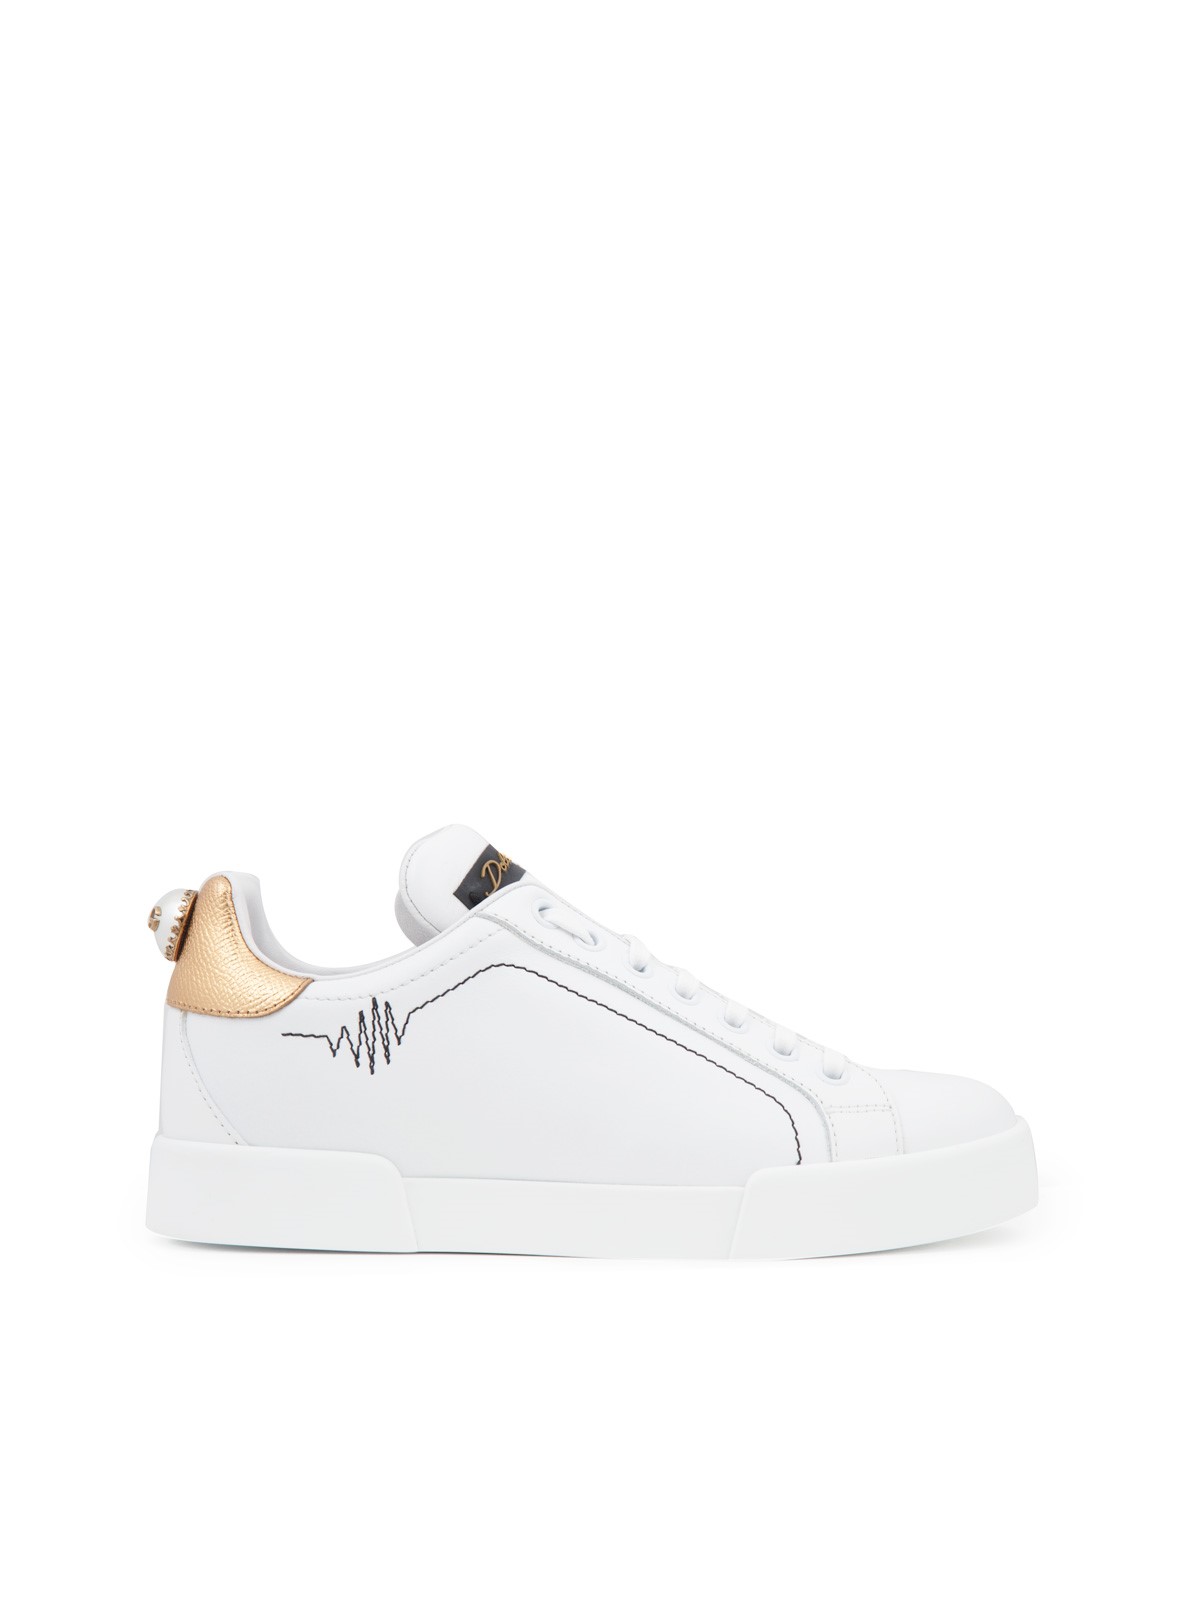 dolce & gabbana PEARL DETAIL SNEAKERS available on  - 20357